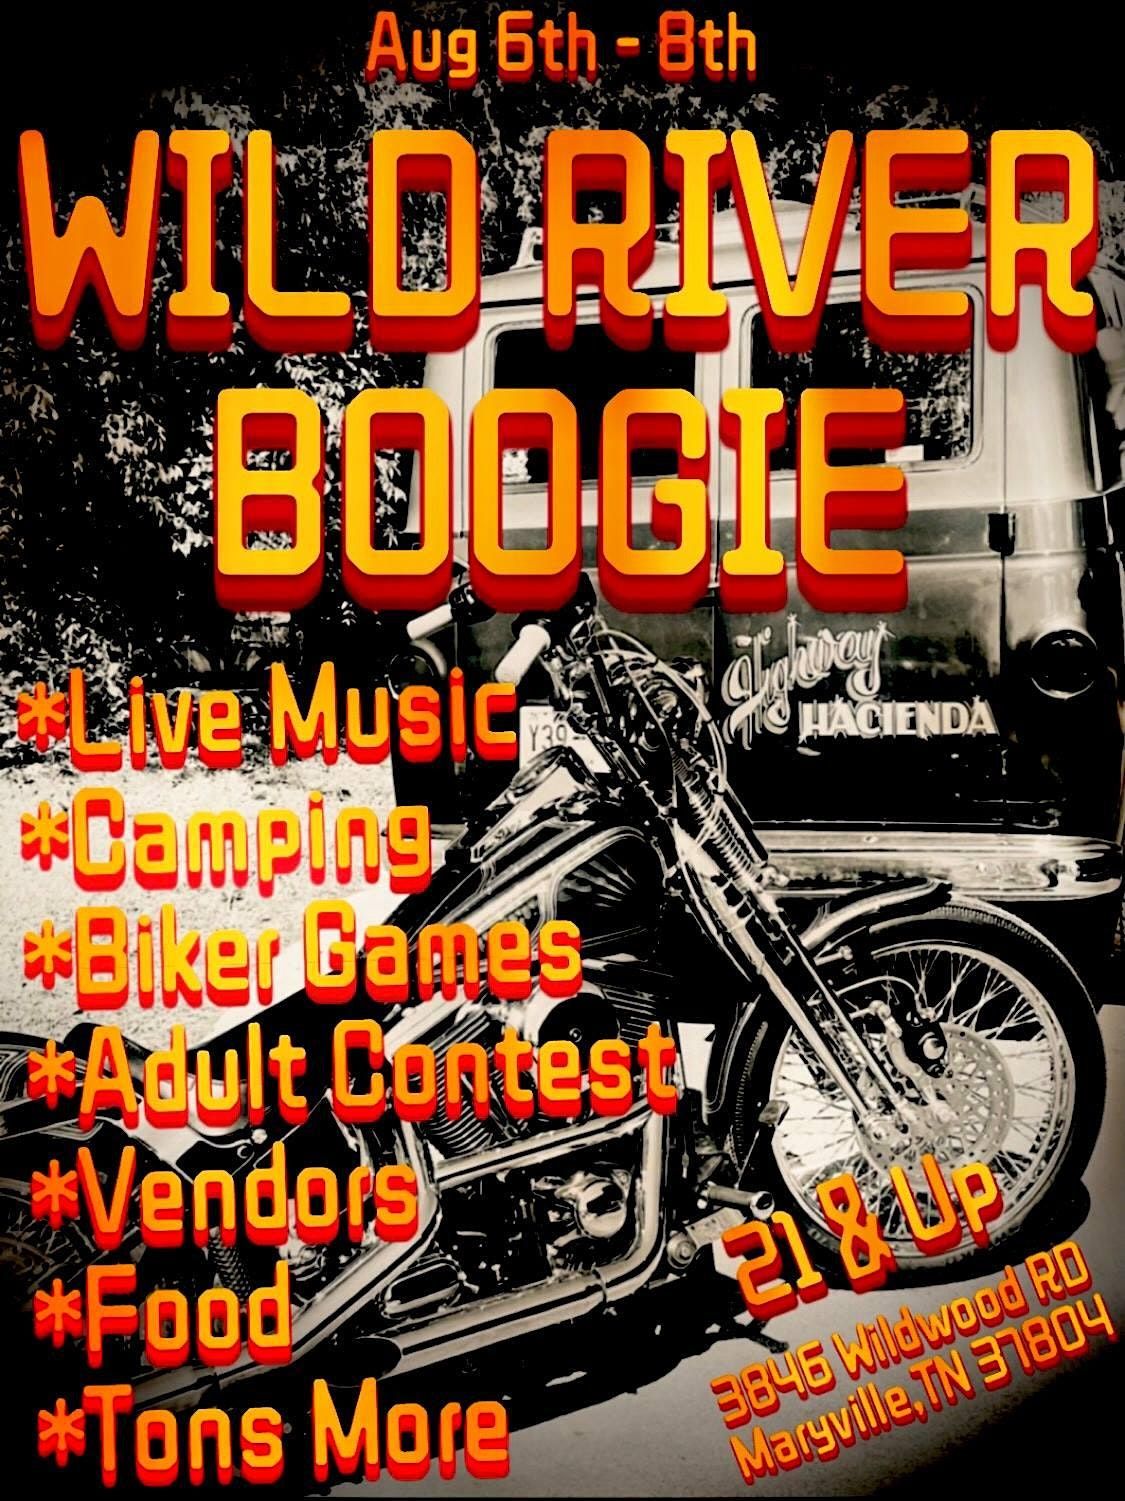 Wild River Boogie 2021 3846 Wildwood Rd, Maryville, TN August 5 to